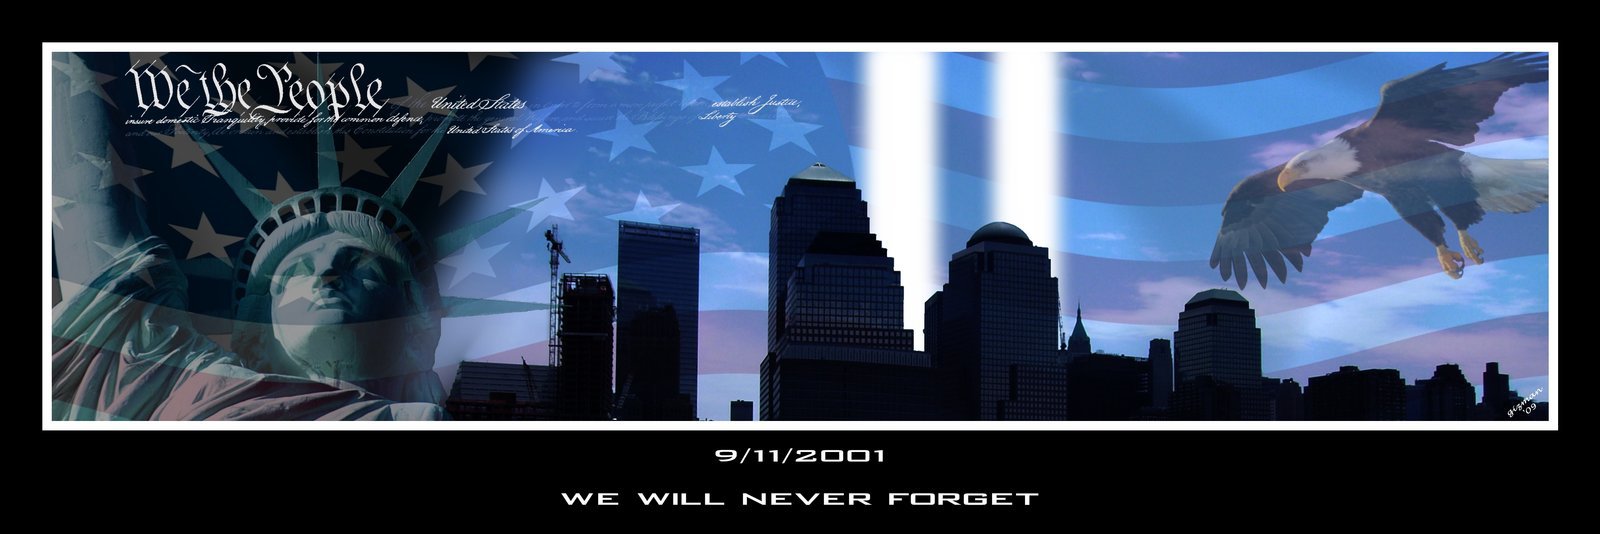 We Will Never Forget By Giz183